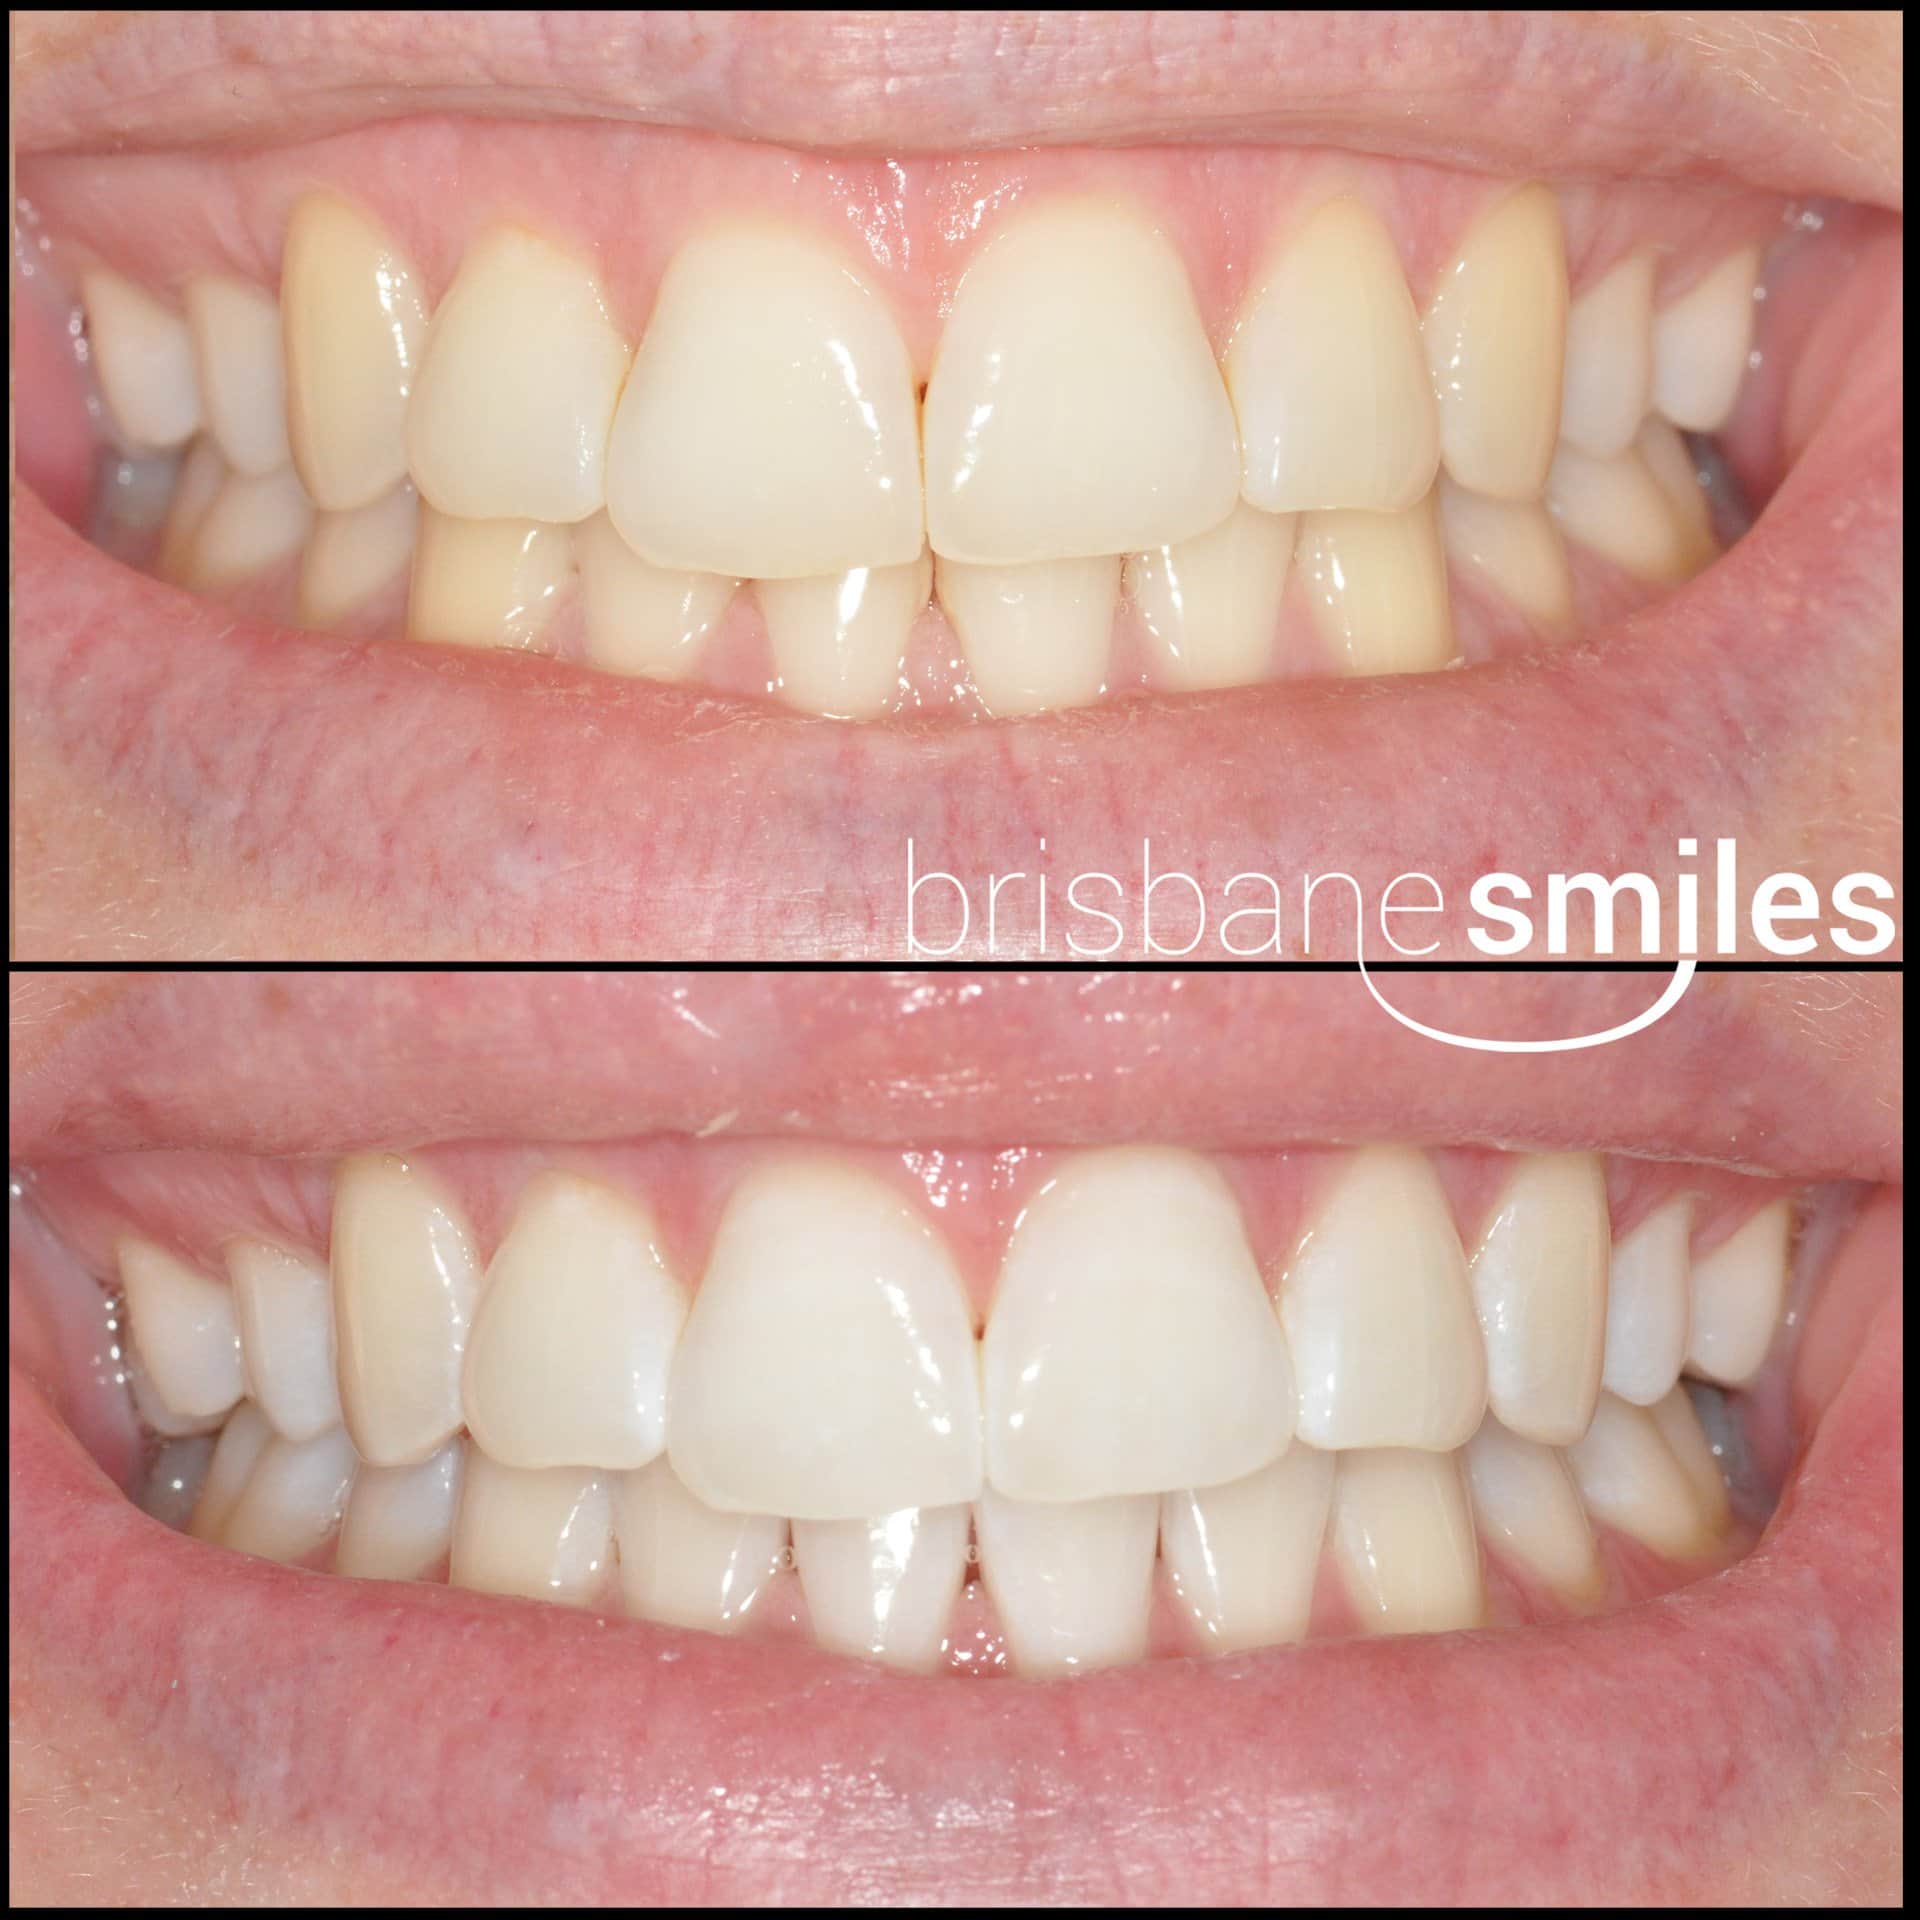 zoom teeth whitening before and after